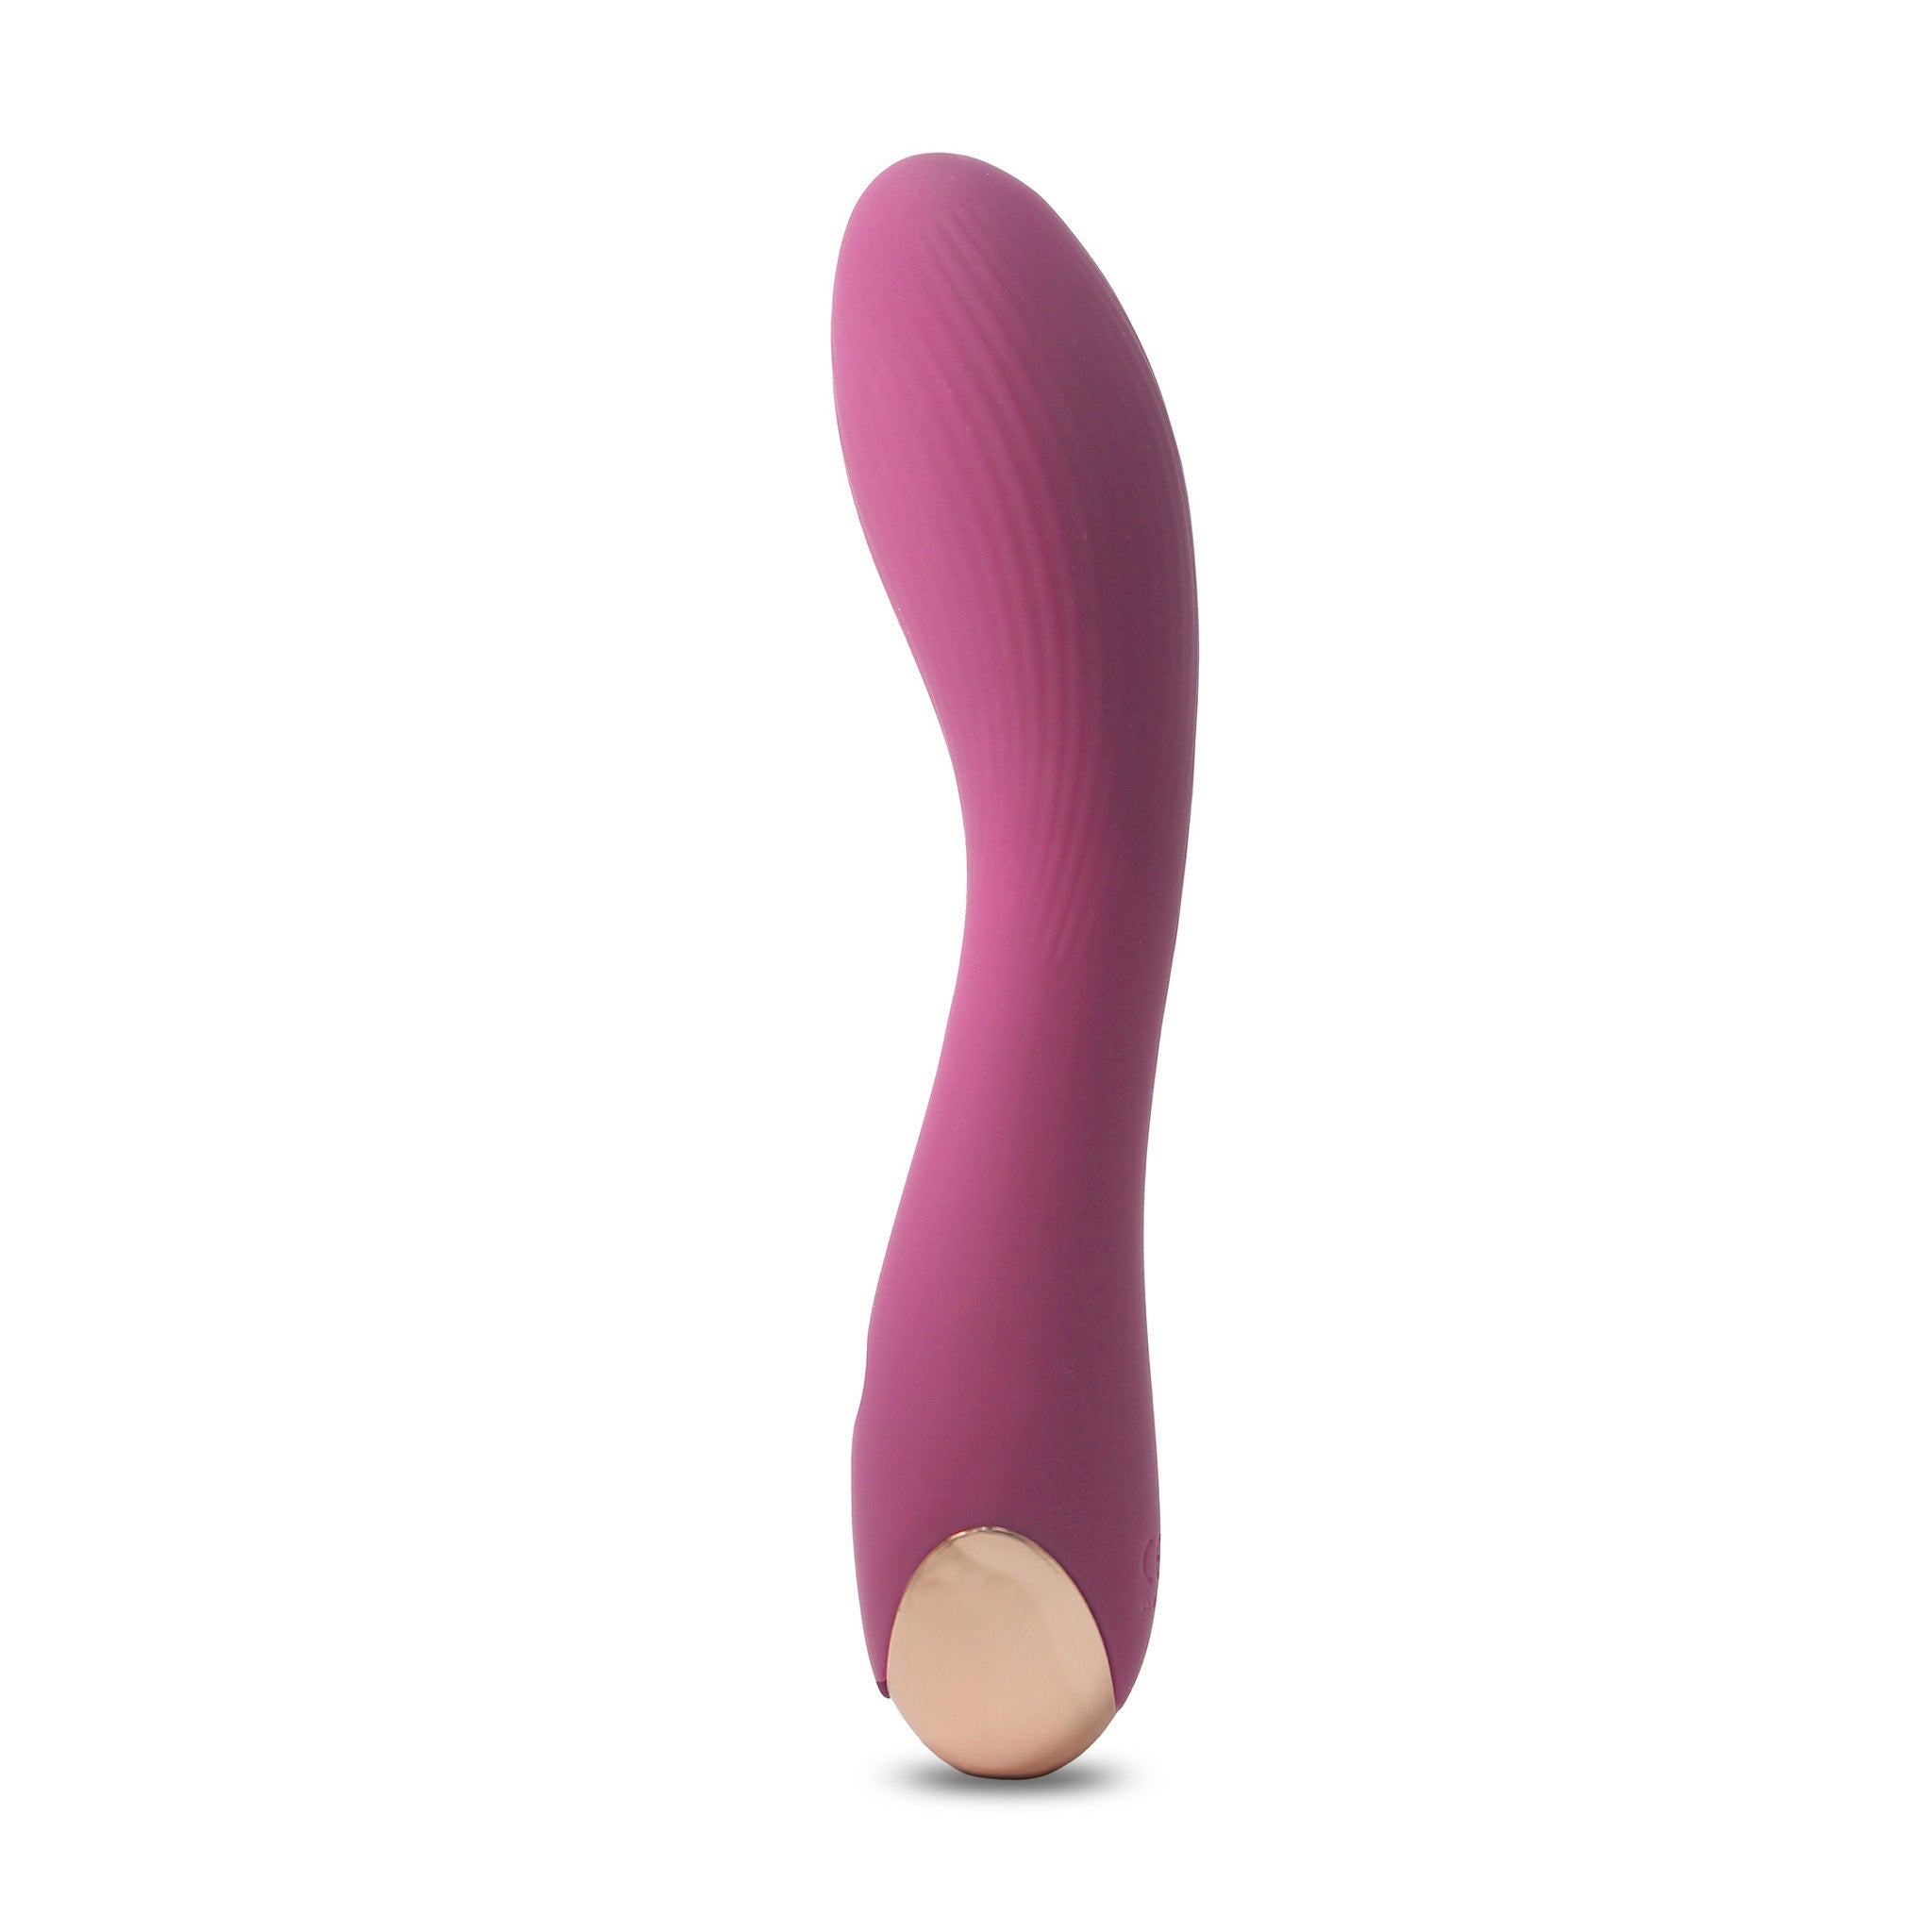 Smooth Silicone Curved G-spot Massager Vibrator Beginner Sex Toys